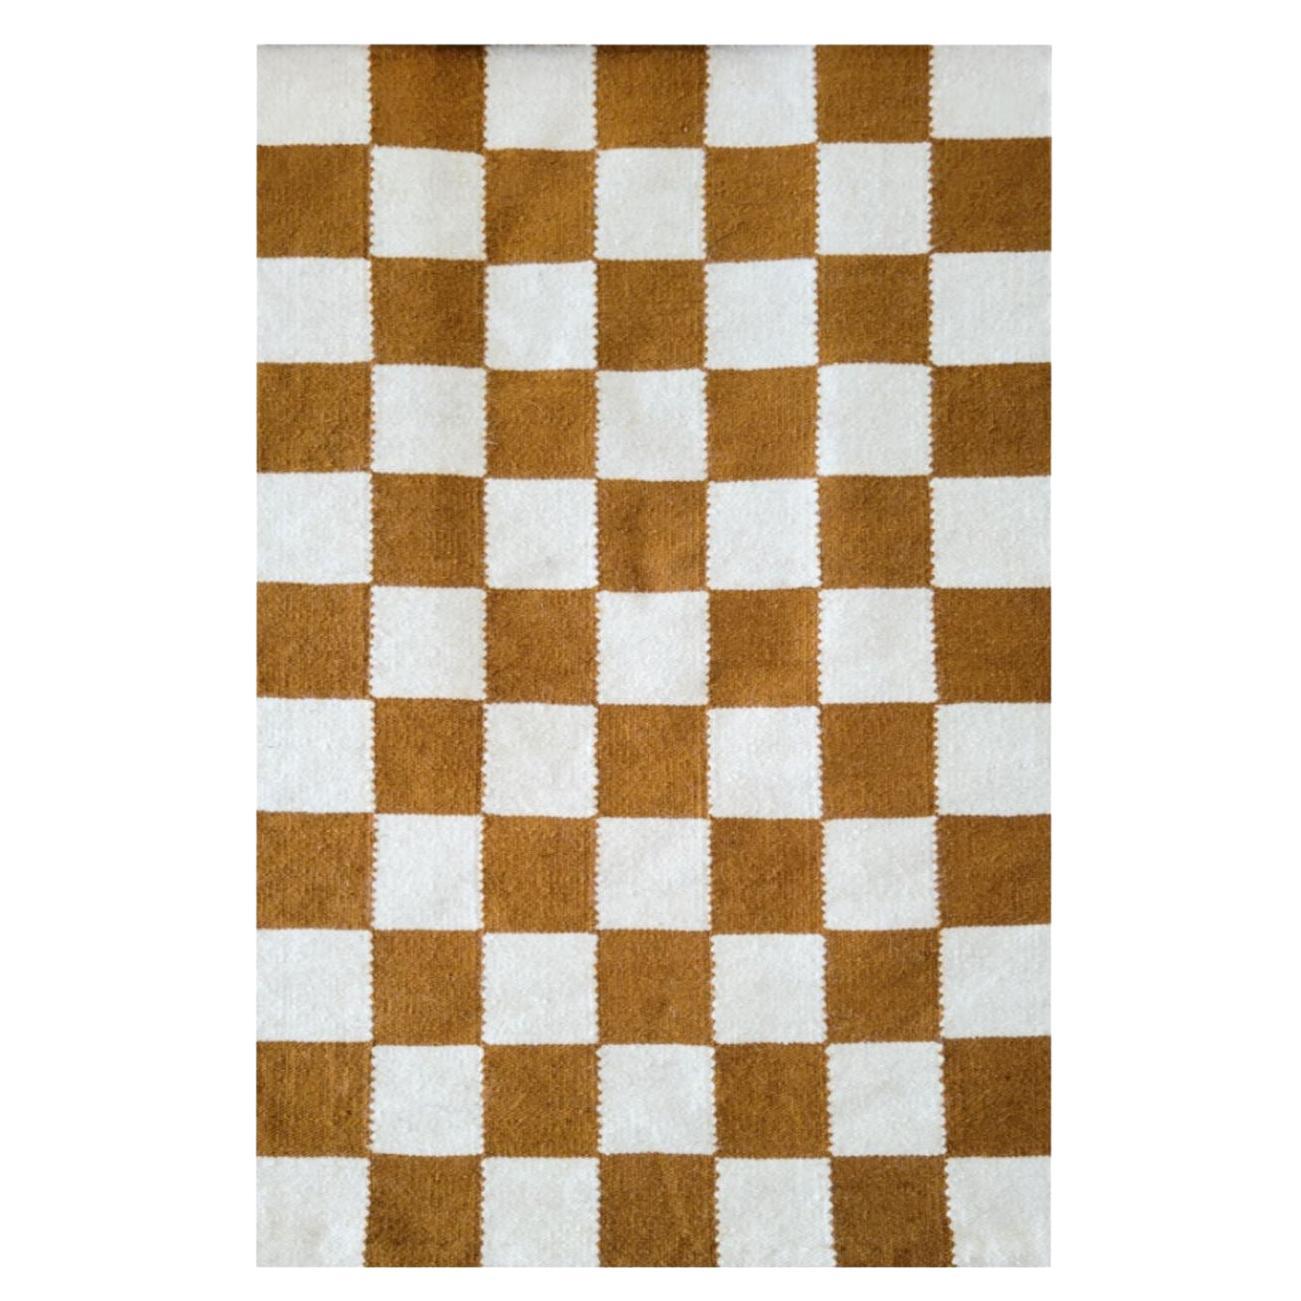 Rustic Checkered Handwoven Wool Area Rug For Sale